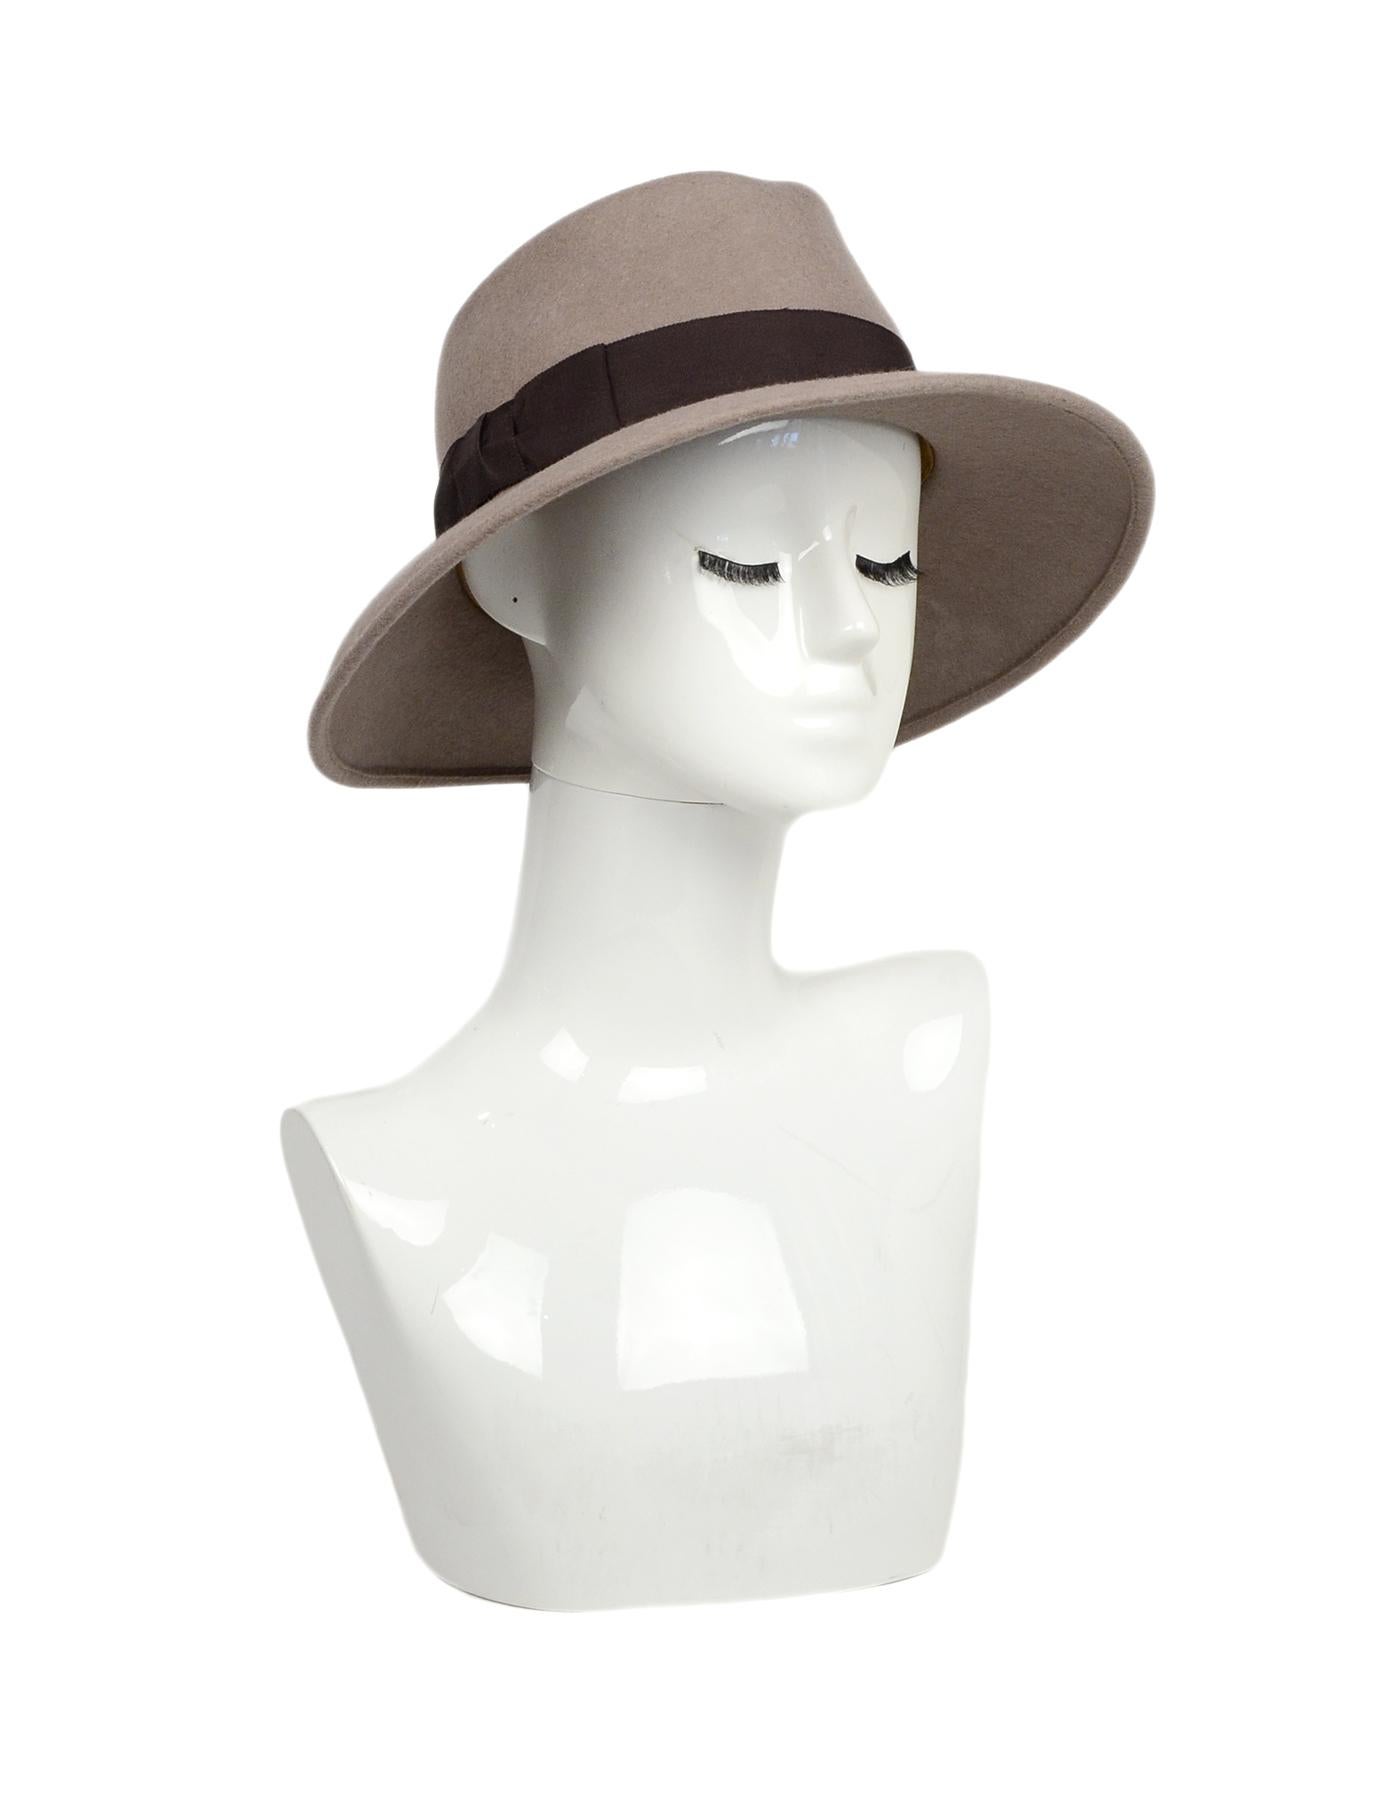 Eric Javits Taupe Hat W/ Brown Ribbon Bow Trim 

Made In: USA
Color: Taupe, brown
Materials: Felt
Closure/Opening: Pull on
Overall Condition: Excellent pre-owned condition 

Measurements:
12.5